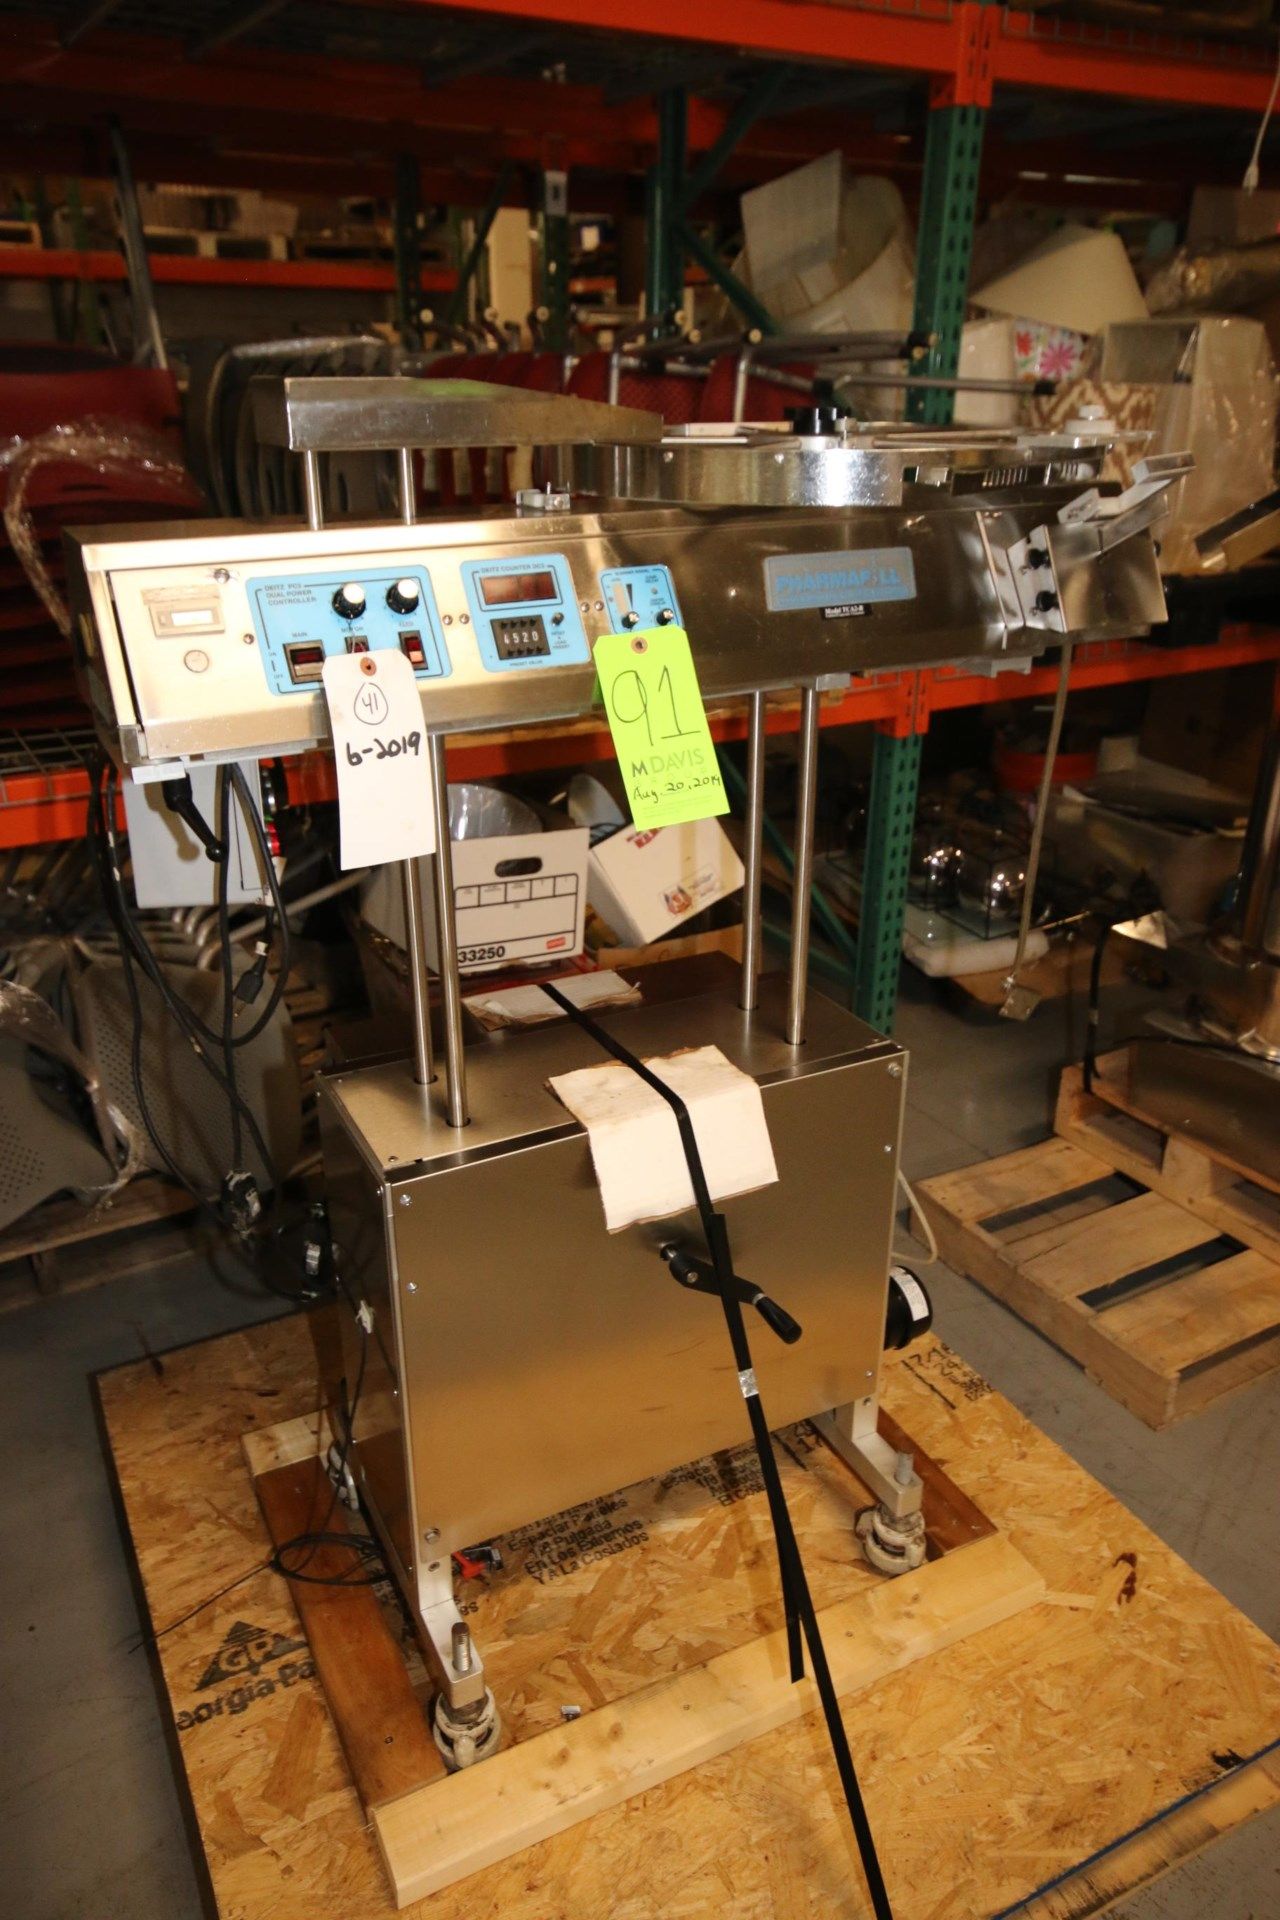 Deitz S/S Tablet/Capsule Counter, M/N TCA2-R, S/N M2012, 115 Volts (LOCATED IN MDG AUCTION